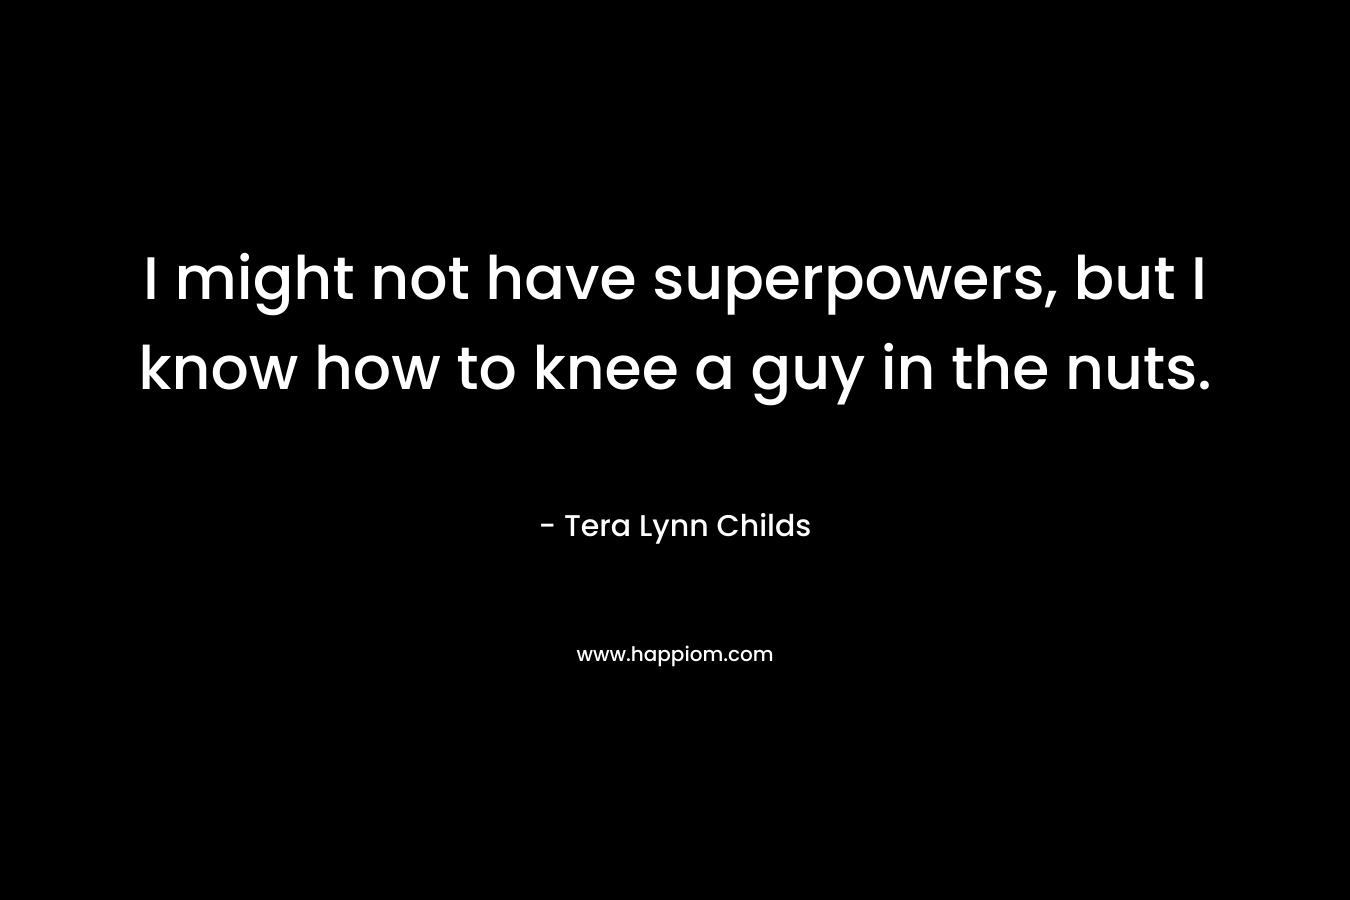 I might not have superpowers, but I know how to knee a guy in the nuts. – Tera Lynn Childs